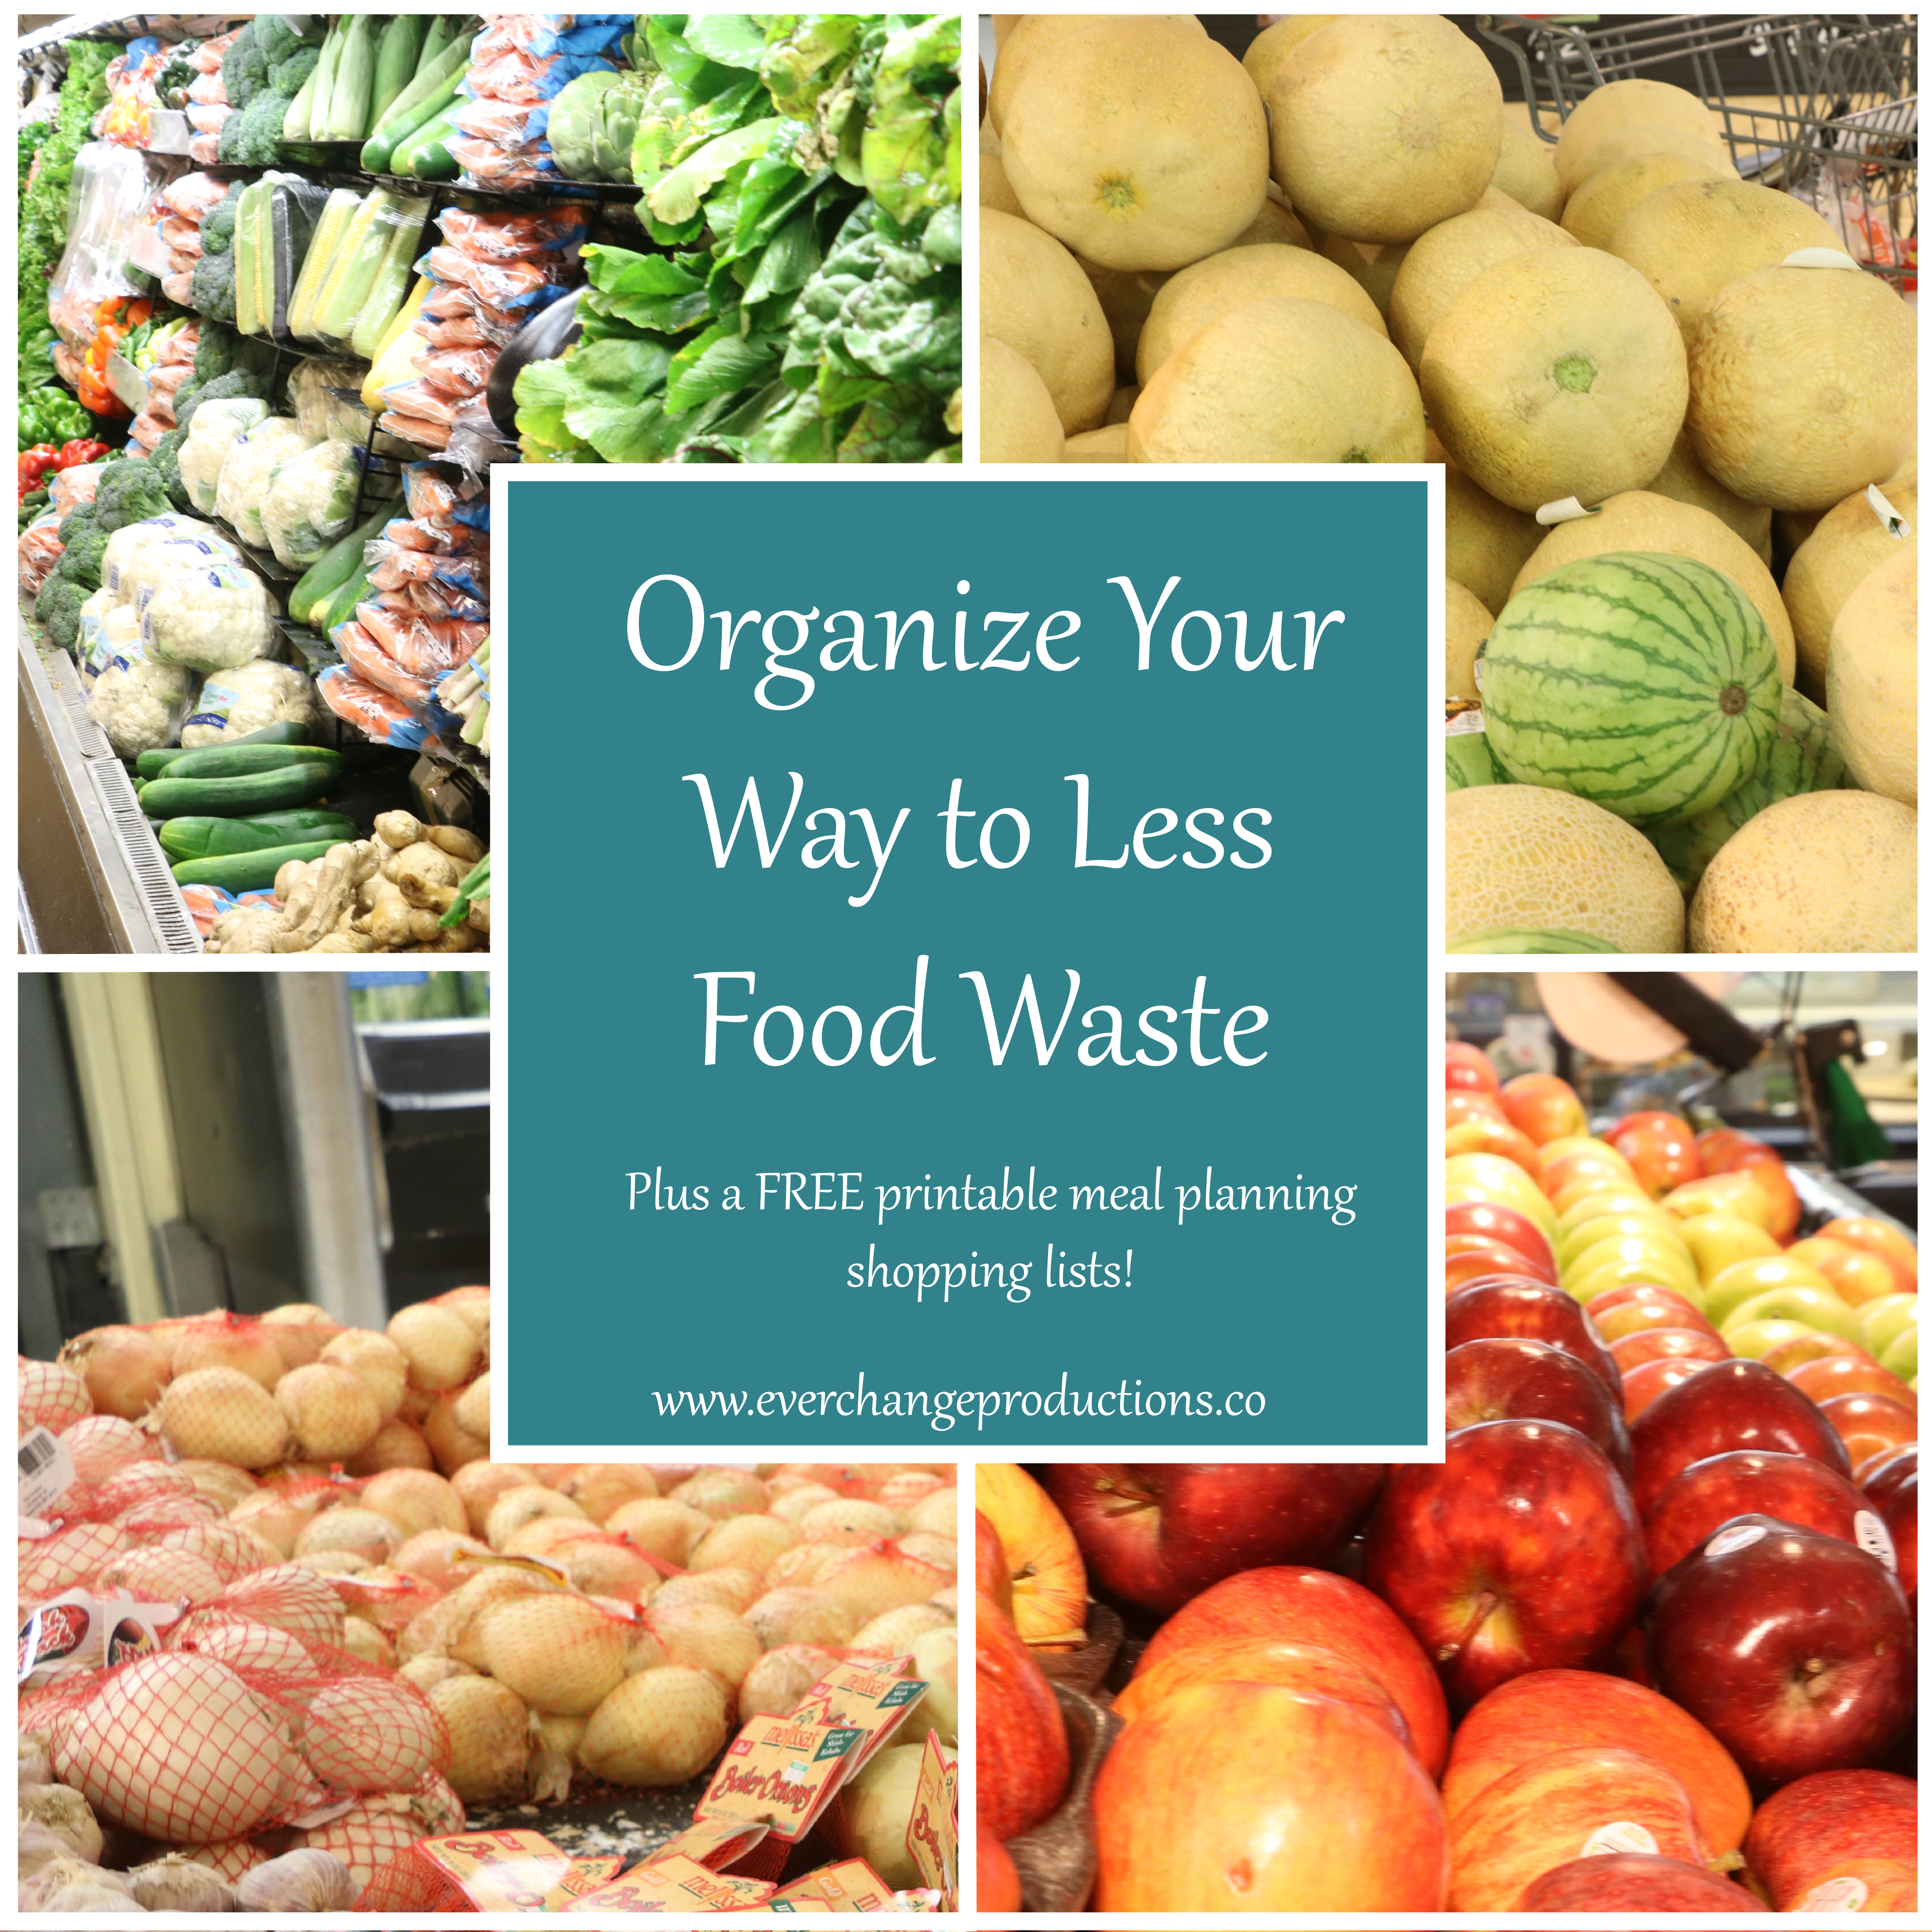 Tired of wasting food? With these simple guides, you can learn to meal plan like a pro to save money and waste.